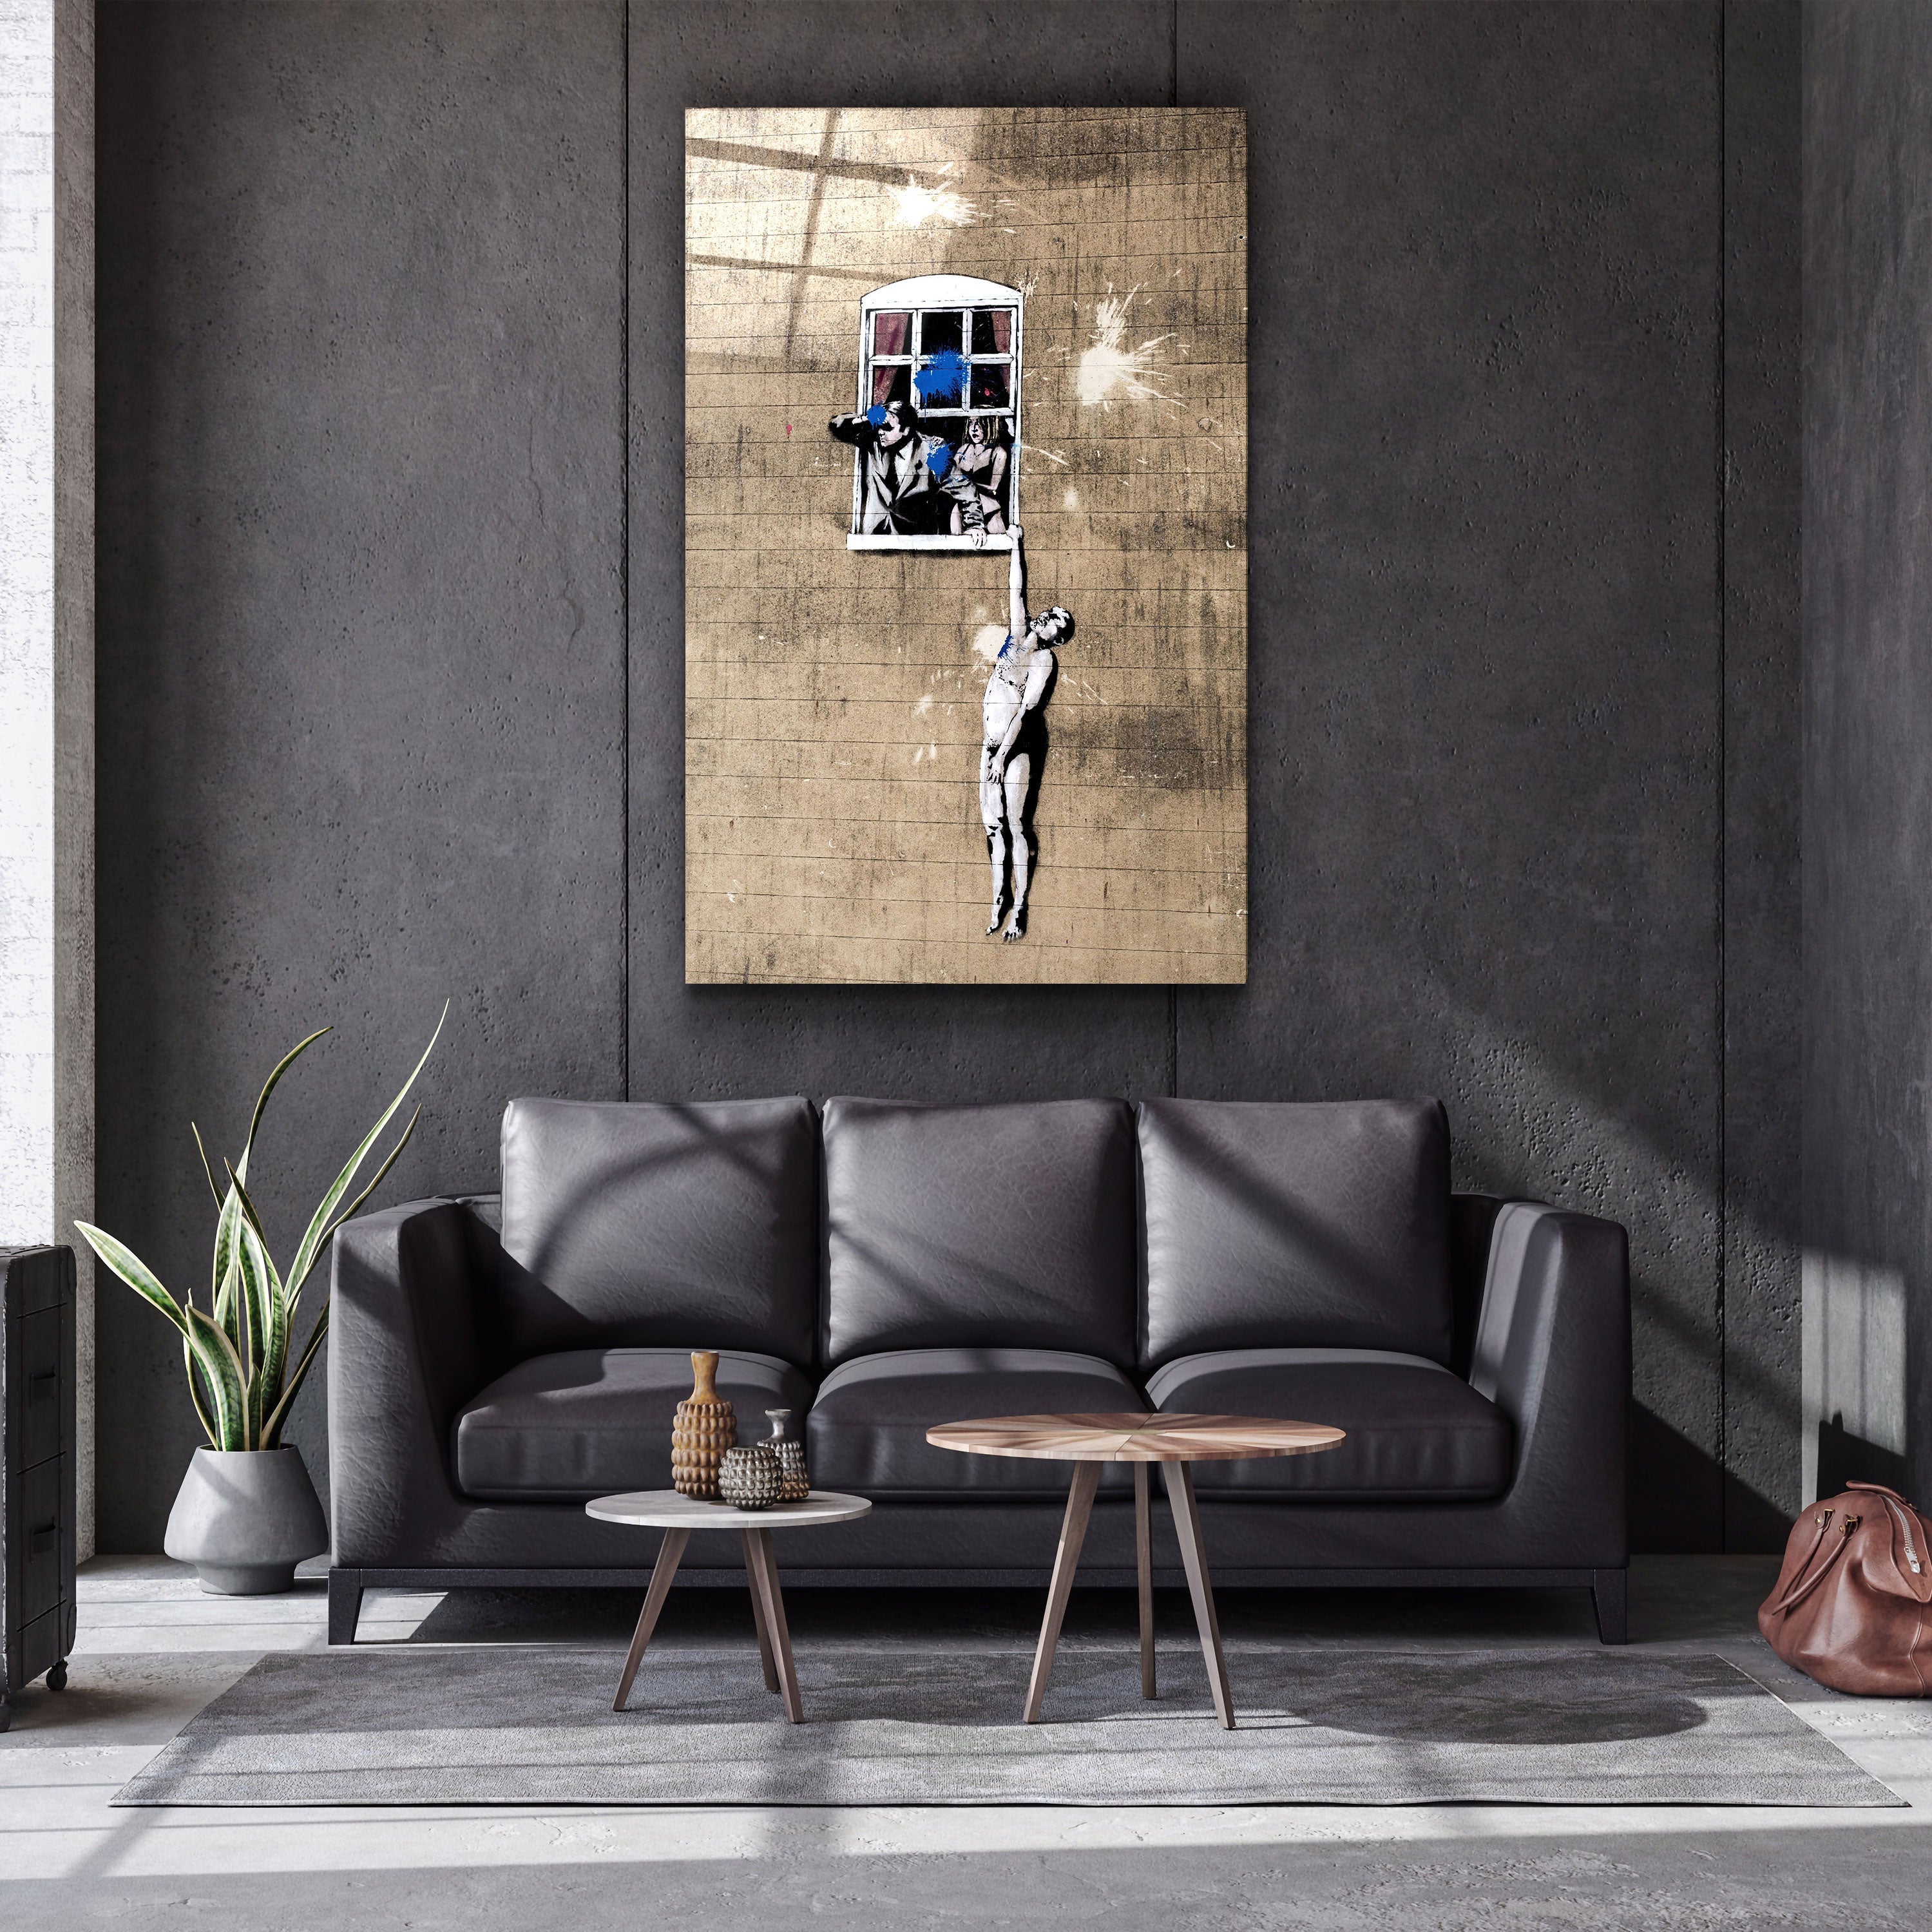 ・"Banksy - Man hanging from a window"・Glass Wall Art